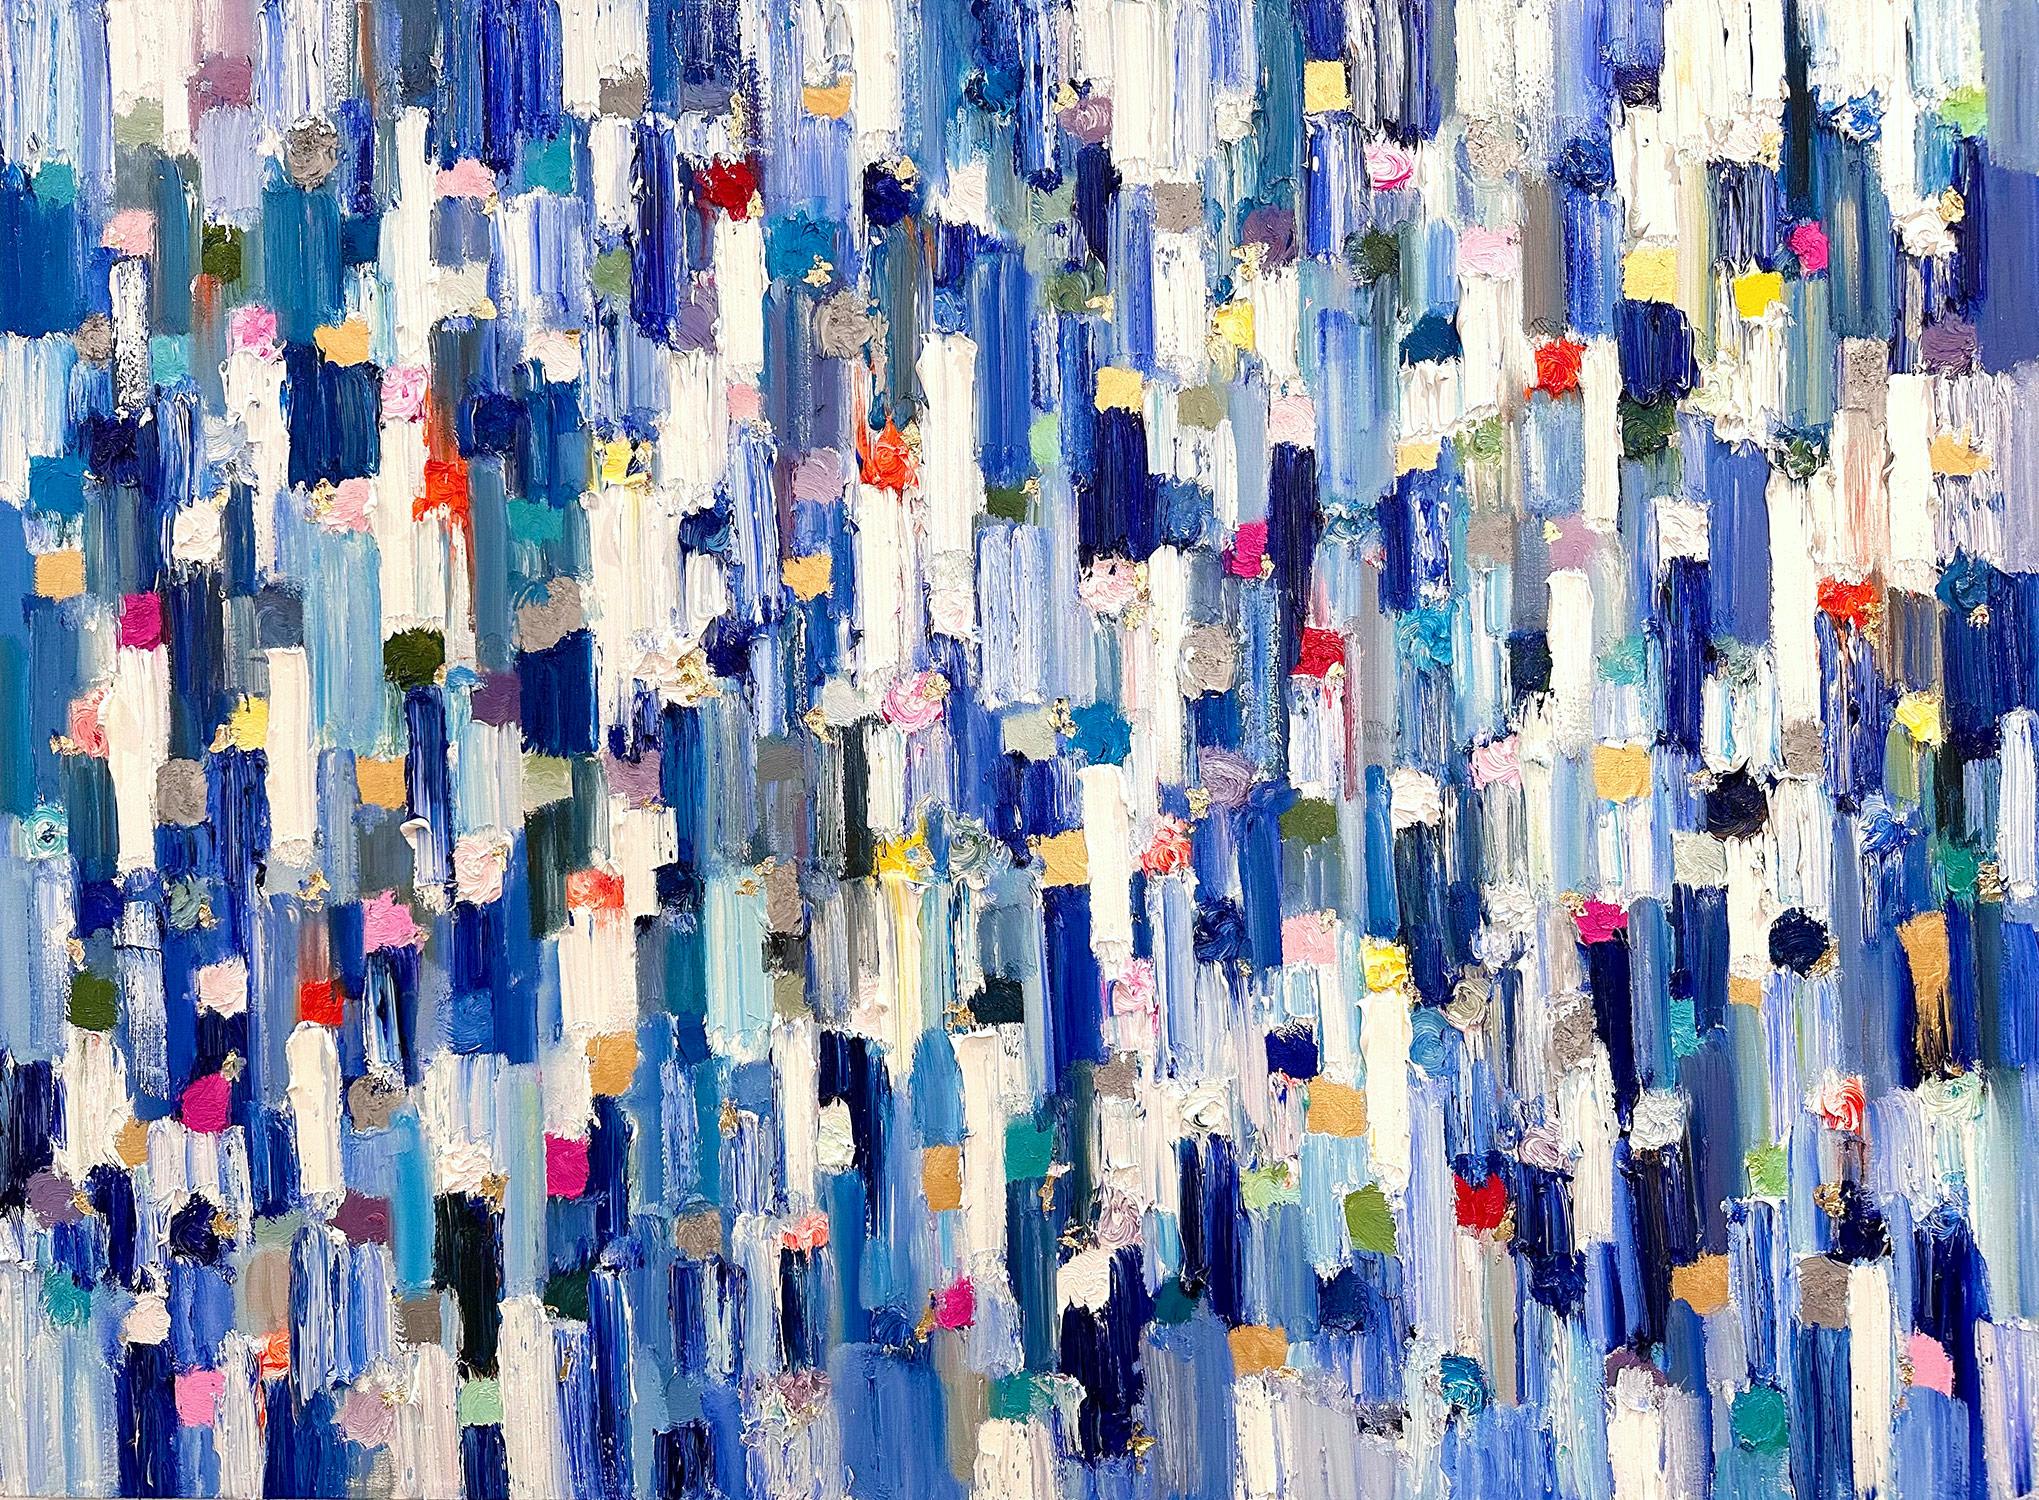 Cindy Shaoul Abstract Painting – "Dripping Dots - Porto Fino" Multicolor Contemporary Ölgemälde auf Leinwand